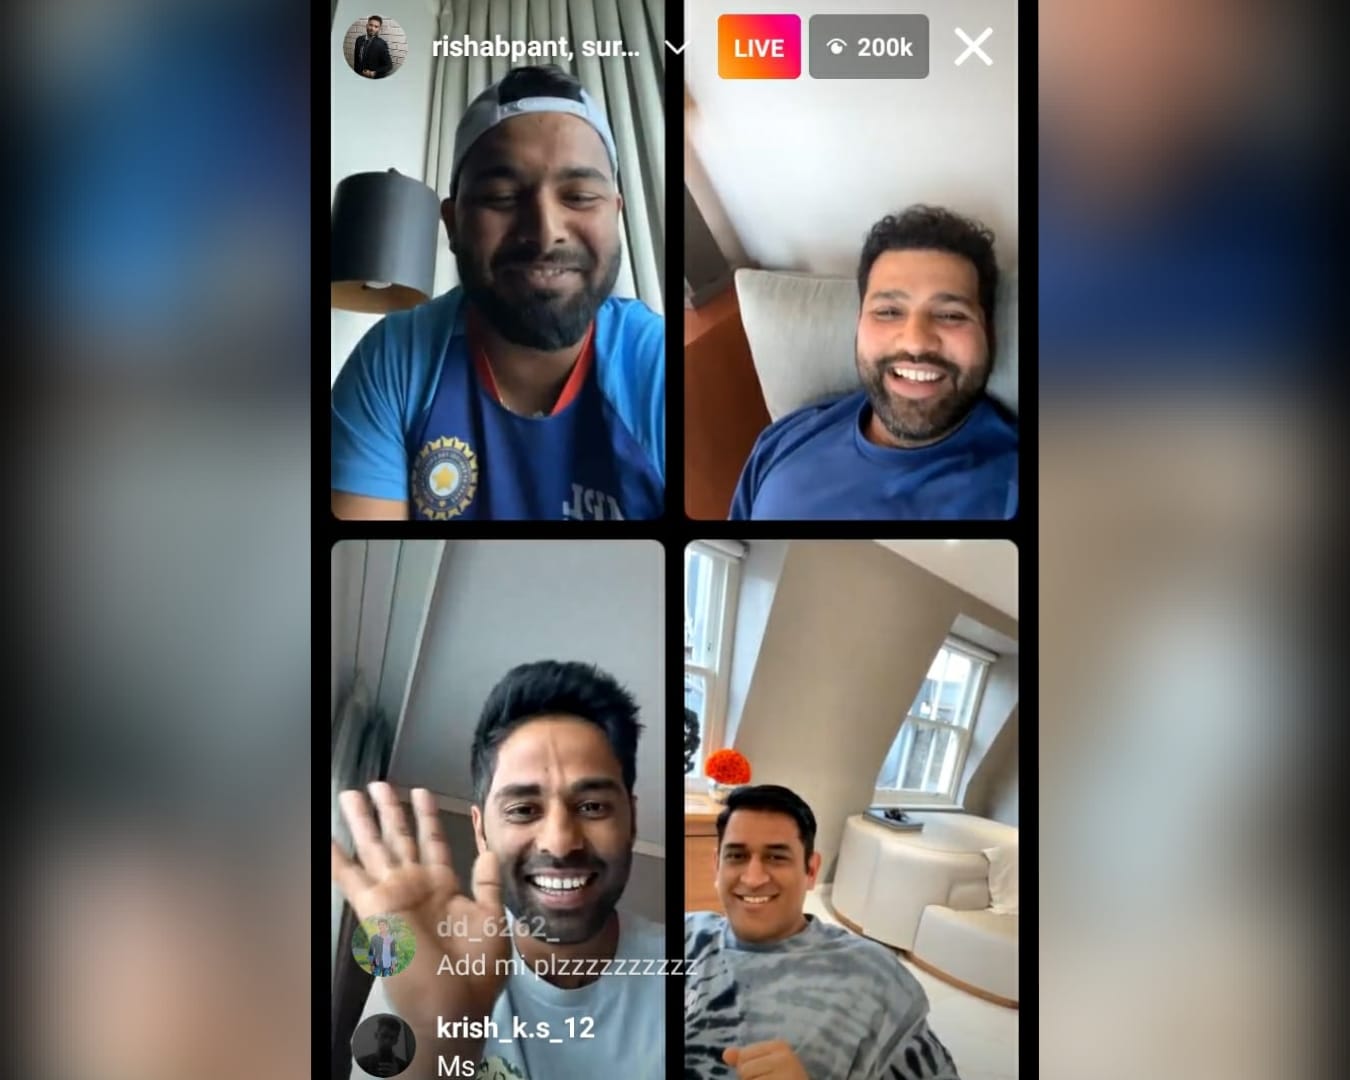 IND vs WI LIVE: Rohit Sharma, Rishabh Pant poke fun at Yuzvendra Chahal on Instagram Live as India stars chime in, former captain MS Dhoni makes special appearance - Check out